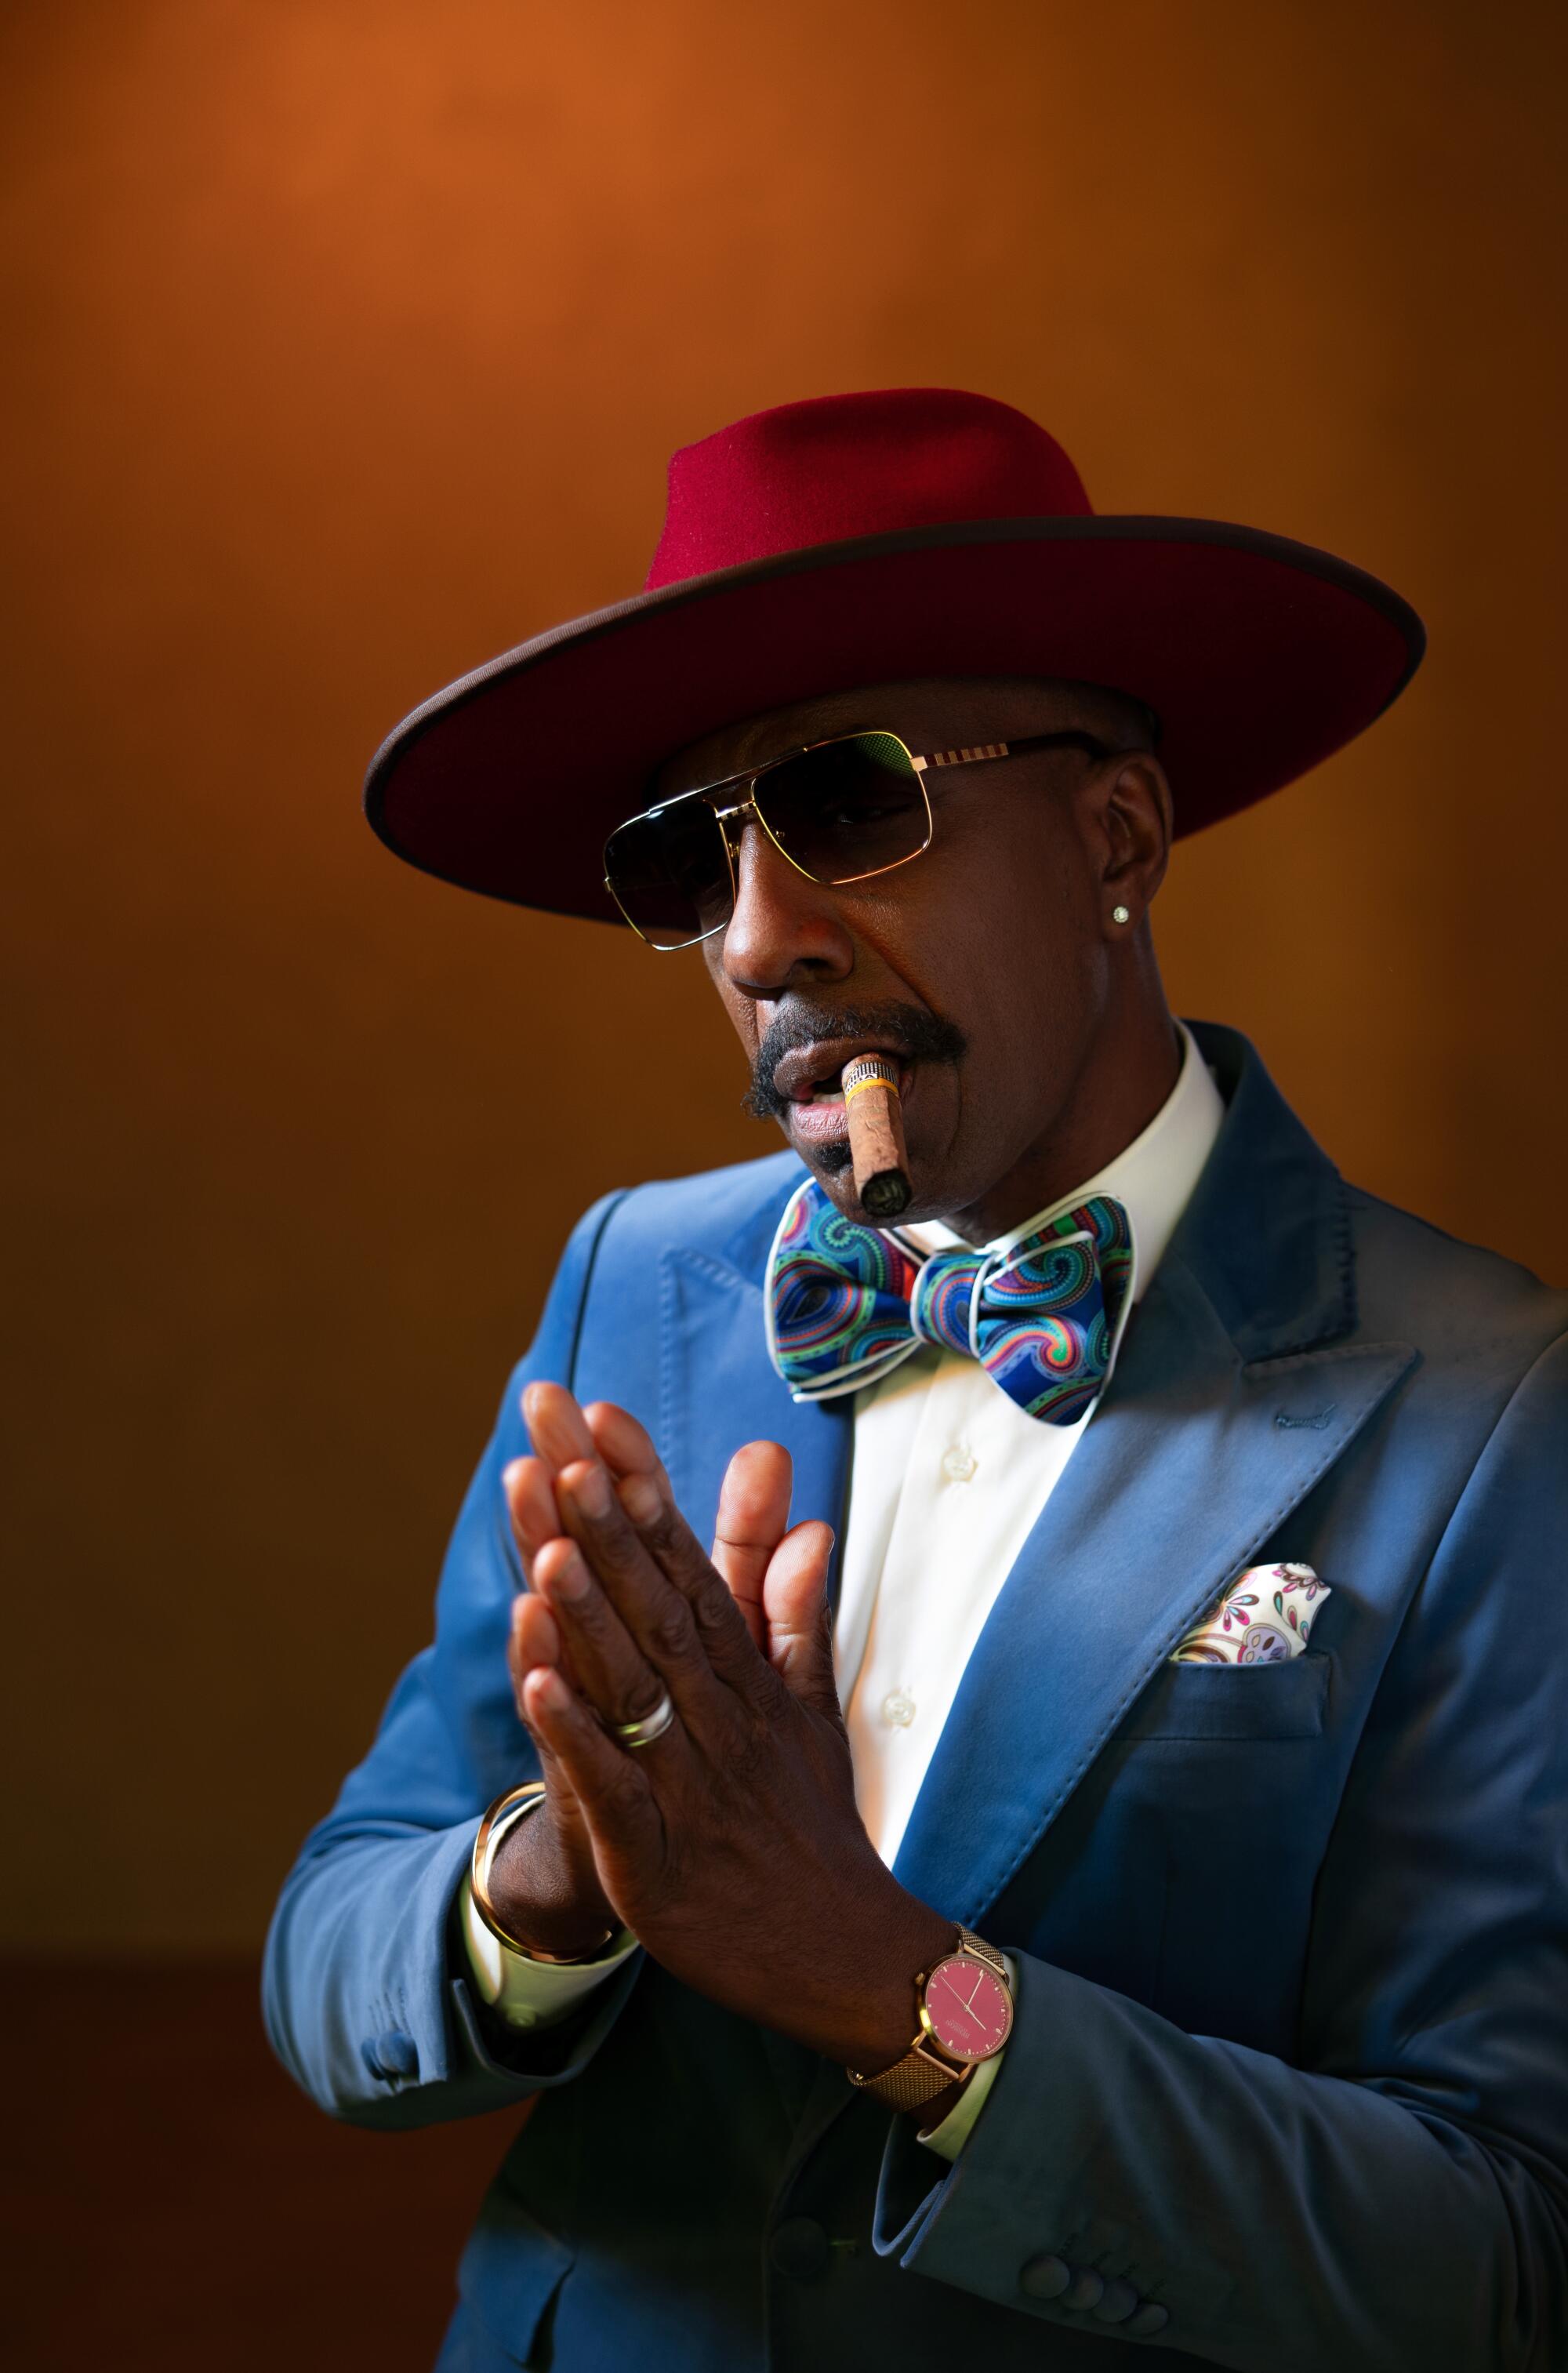 JB Smoove poses for a portrait in a wide-brimmed hat and sunglasses, with a cigar in his mouth.